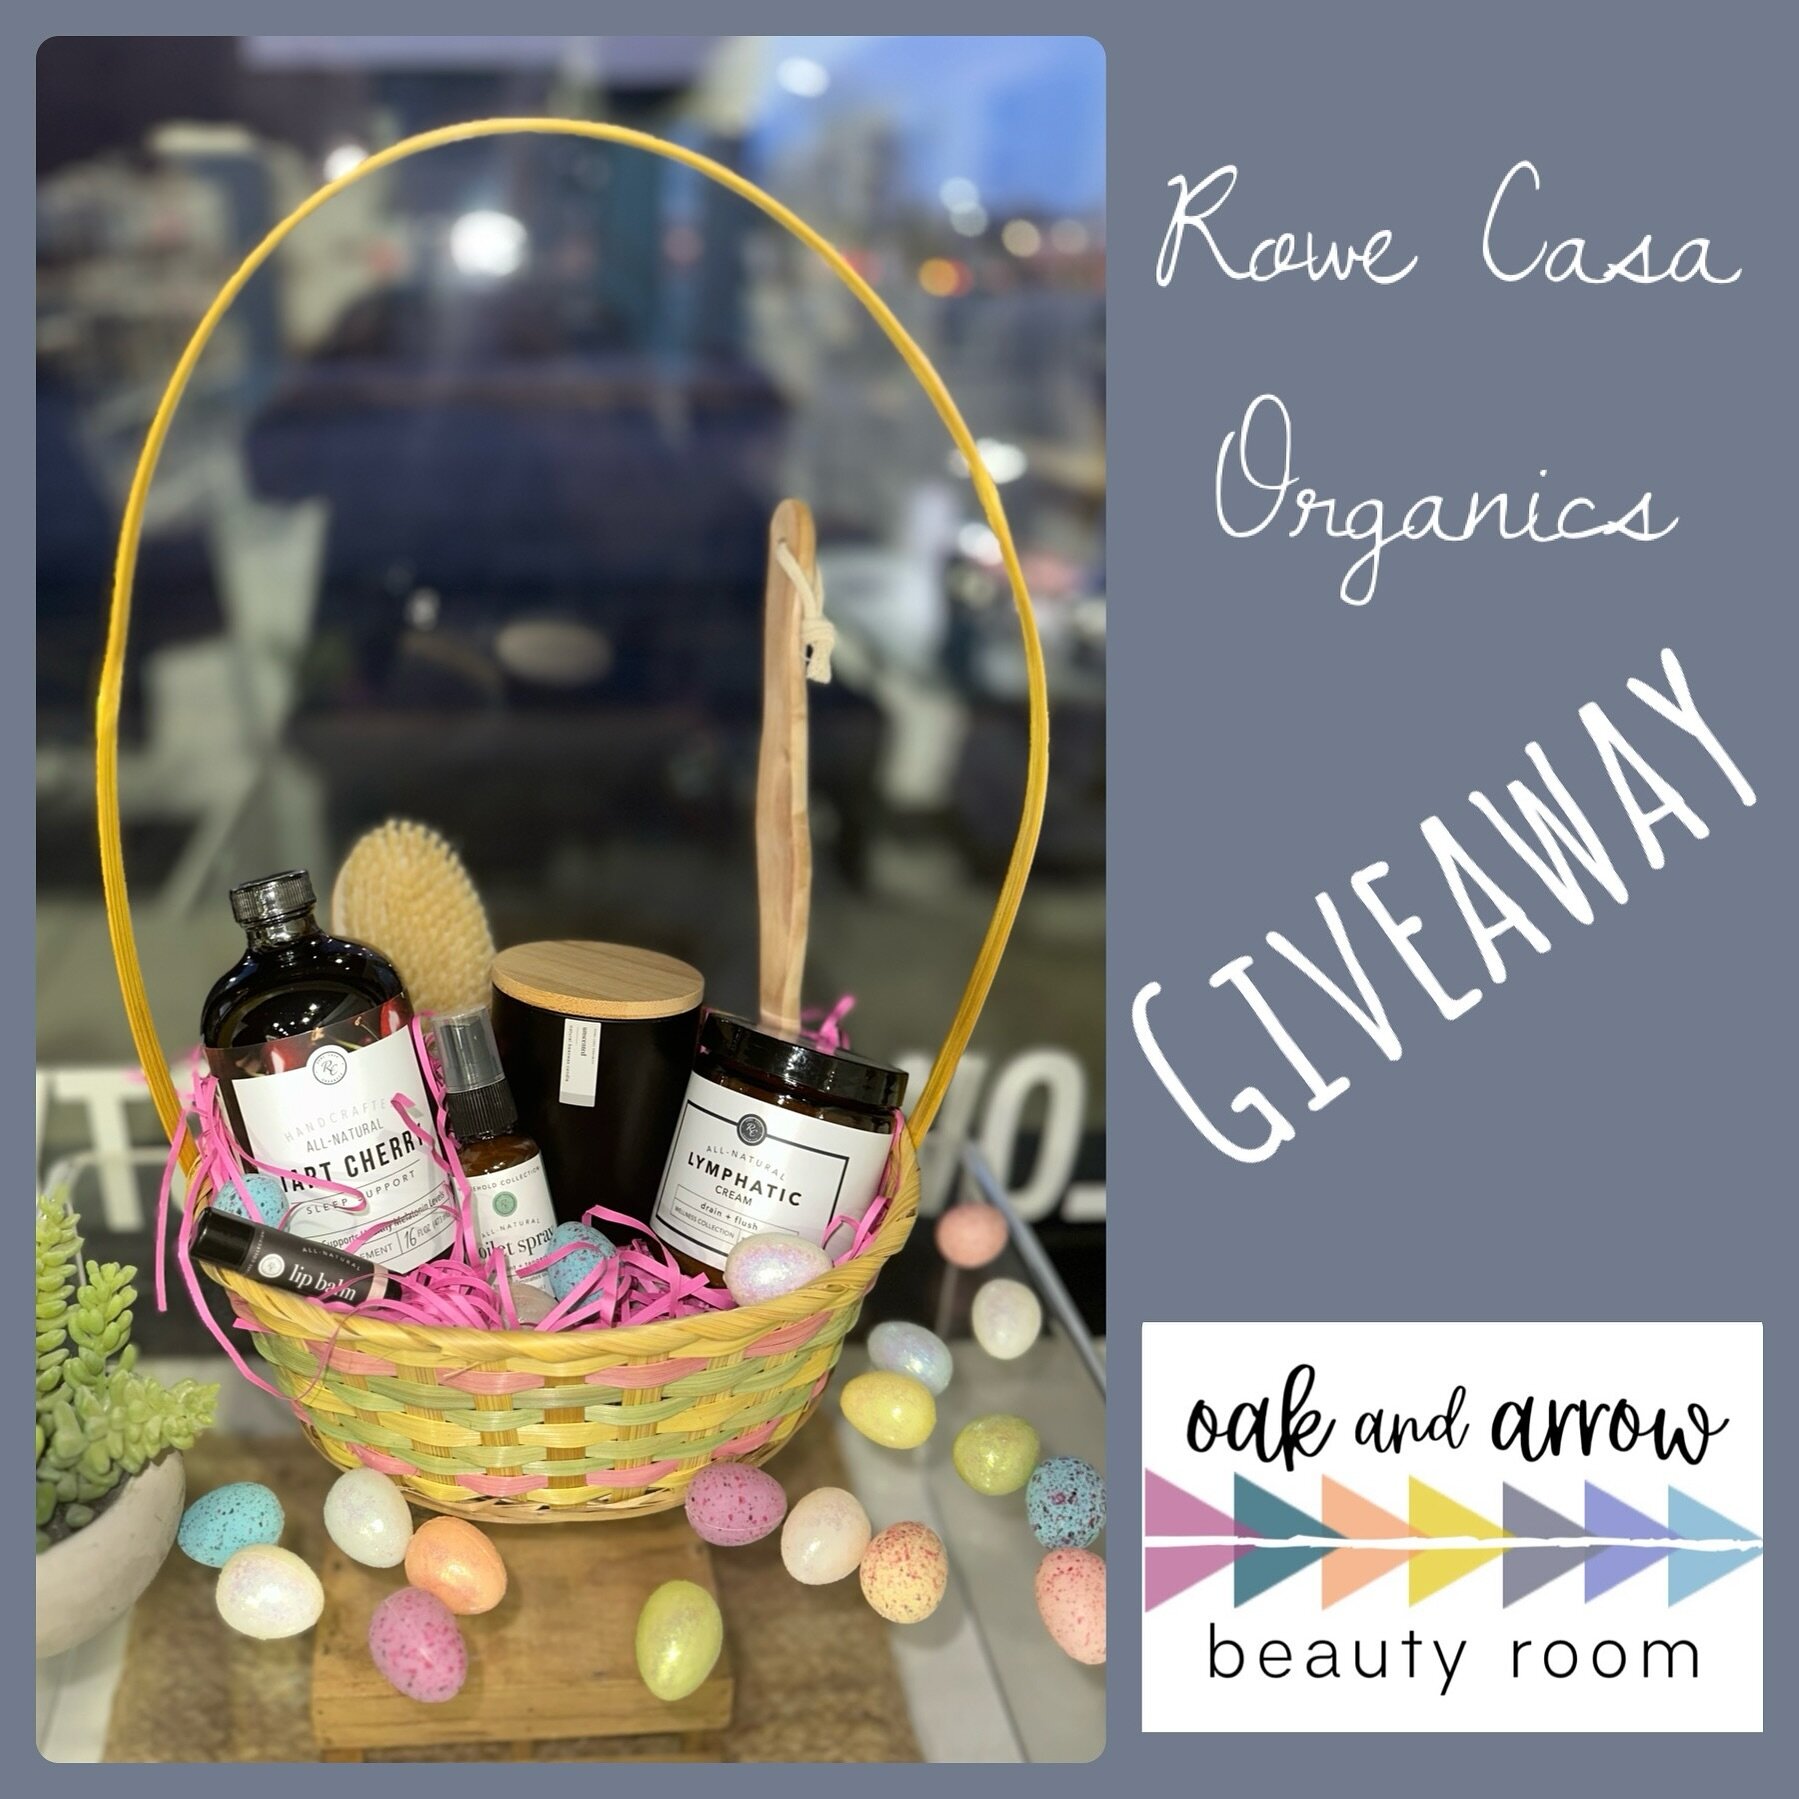 🐇 Hop into 🌸Spring🌞 with our @rowe_casa_organics Easter Basket Raffle! 
Egg-citing organic products await! 🛍️
How to enter:
👍🏻 Like this post 
⌨️ Tag a bestie you&rsquo;re grateful for 🤗
That&rsquo;s it! 
🛍️$123 value basket full of all-natur